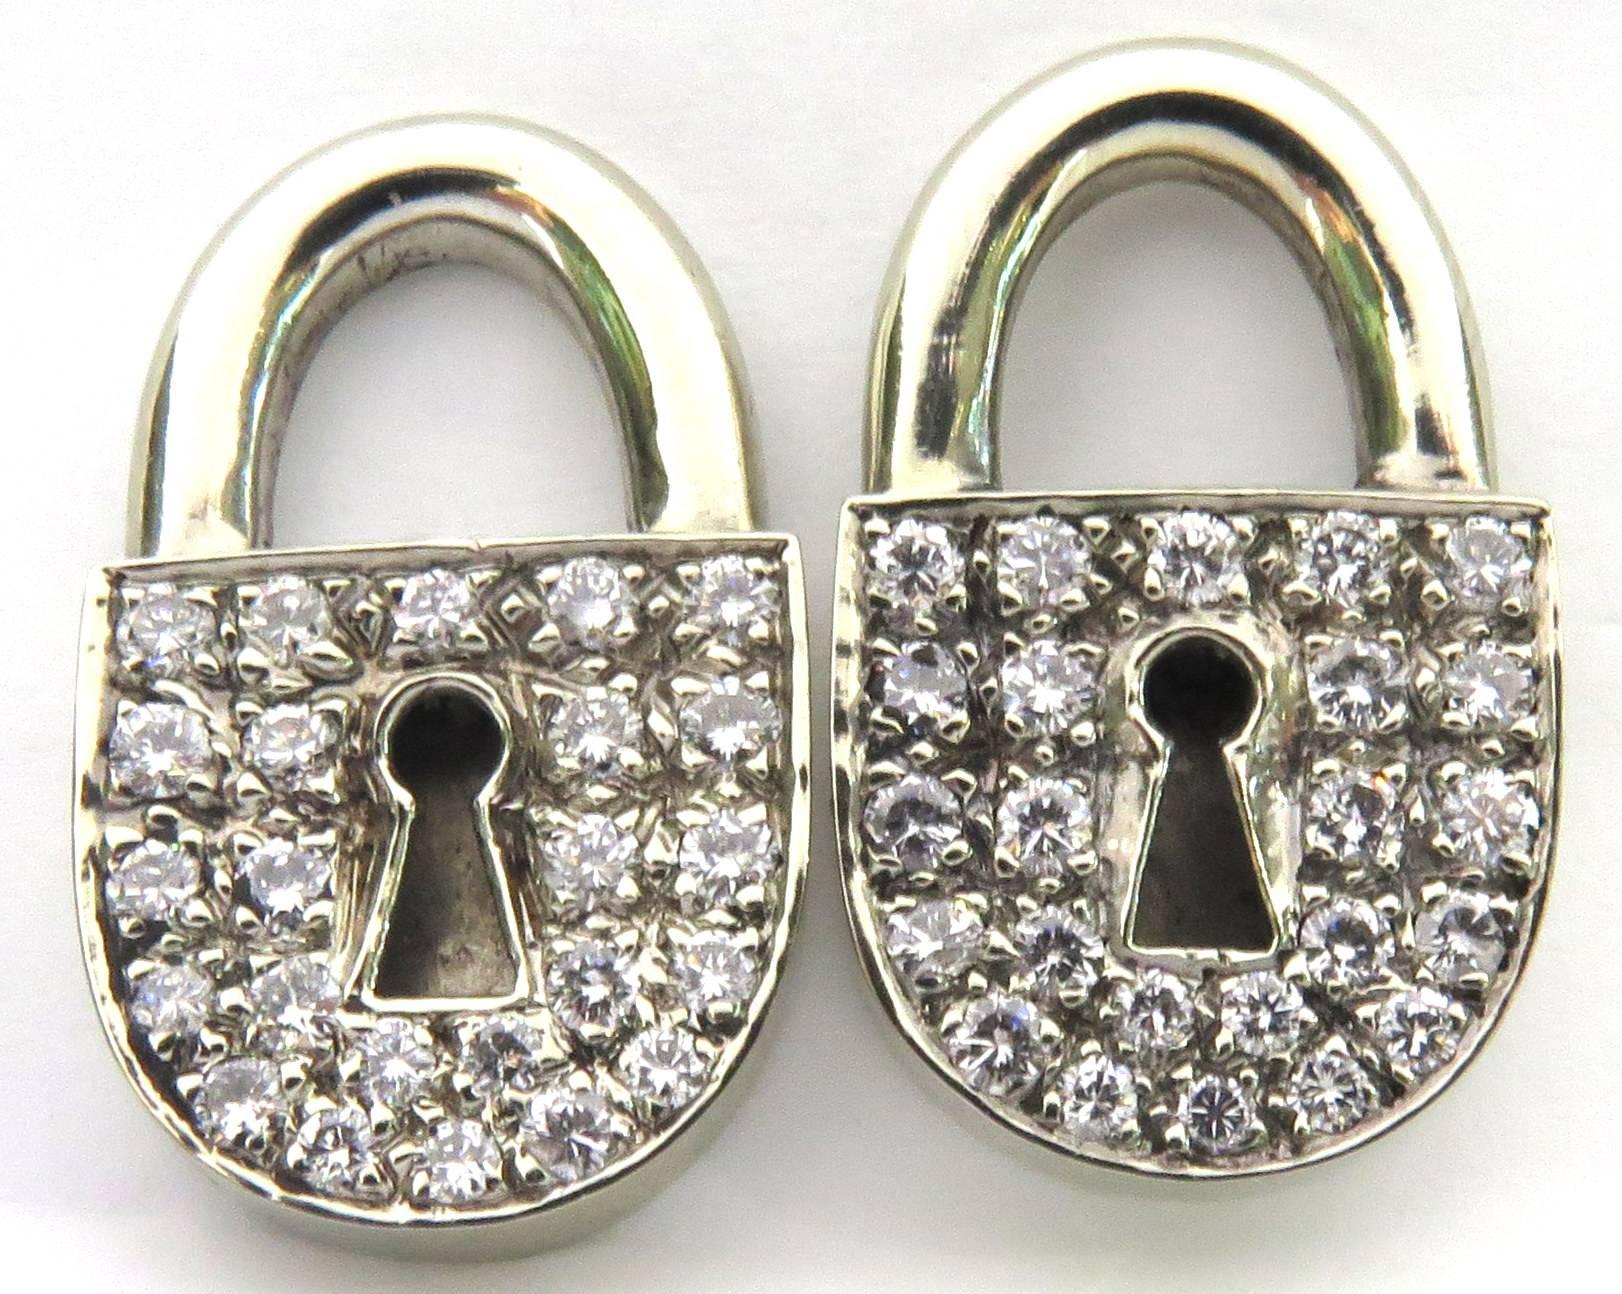 These edgy earrings have so much personality! So easy to wear and comfortable on. These post earrings are set in 14k white gold. There are 1.50ct diamonds. I put the flat plastic back on the back of these earrings (and all my personal earrings)